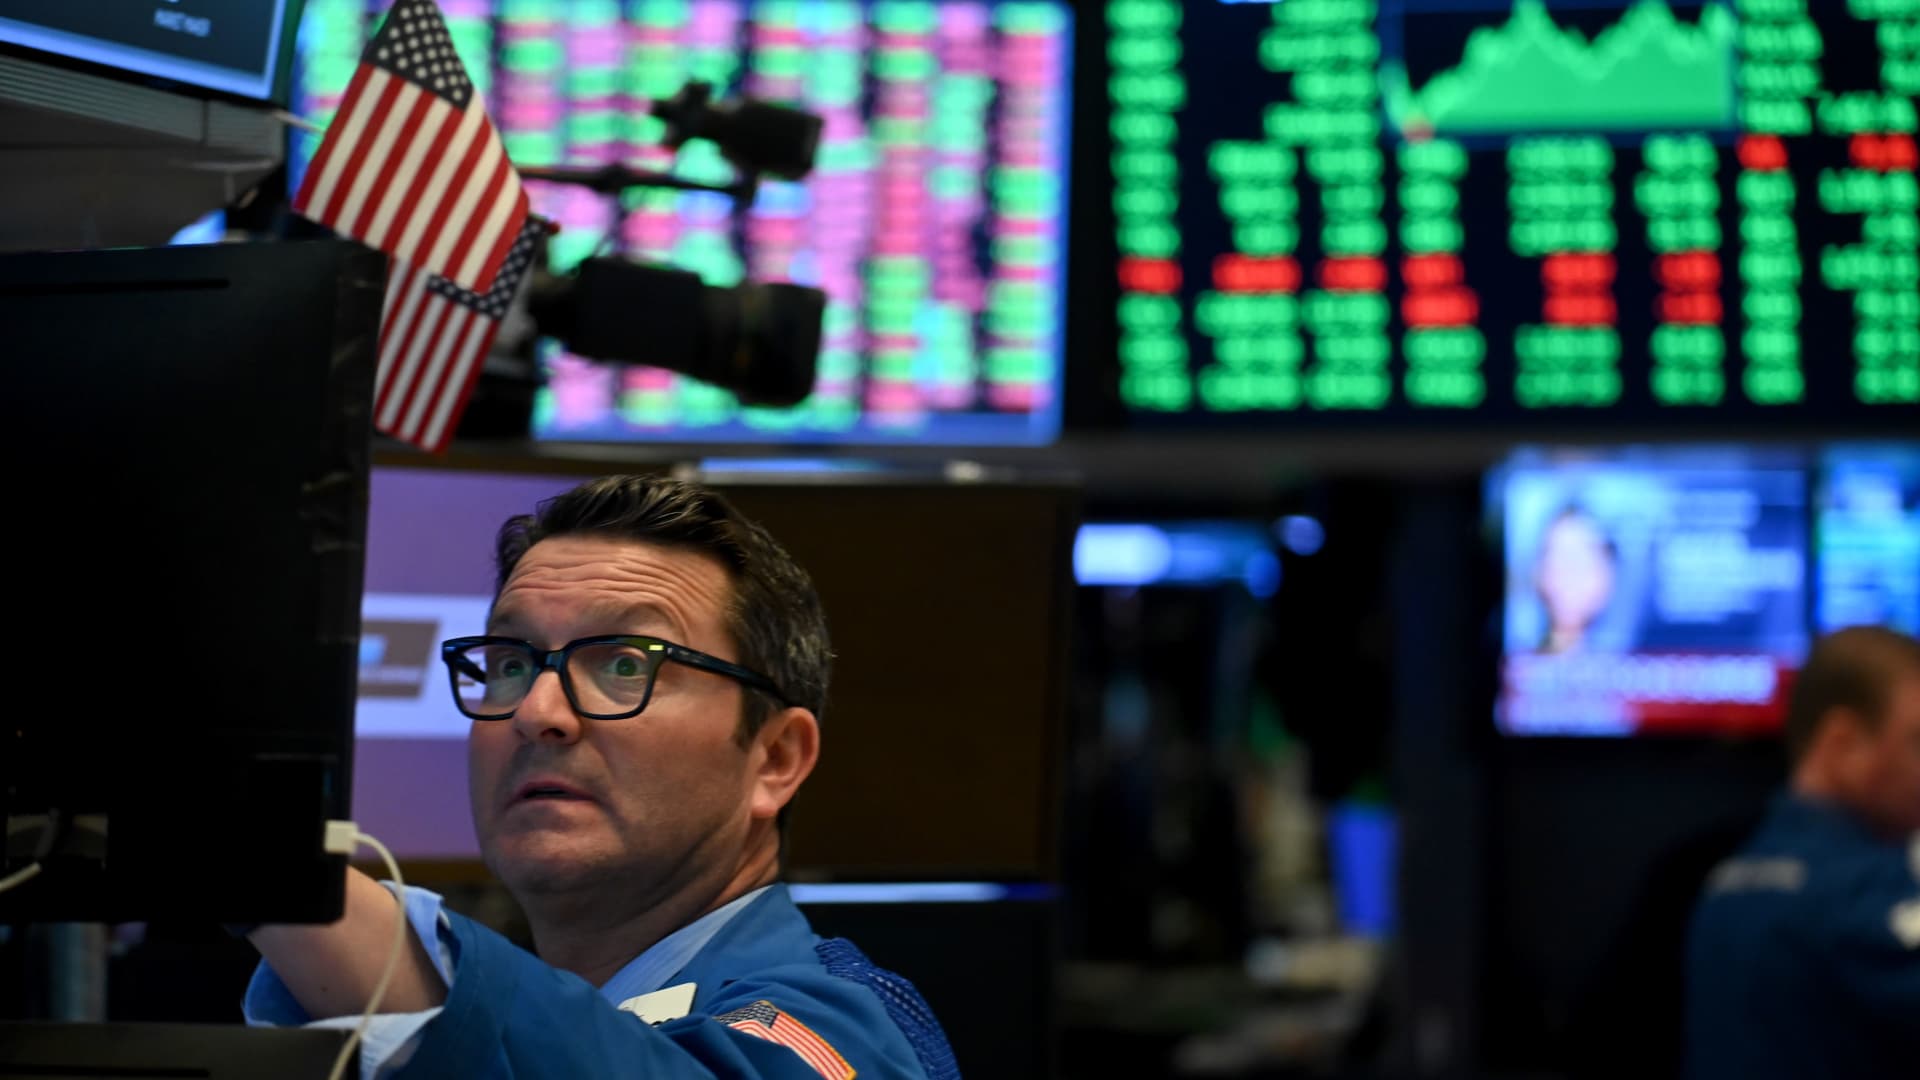 A trader works during the closing bell at the New York Stock Exchange (NYSE) on March 17, 2020 at Wall Street in New York City. 